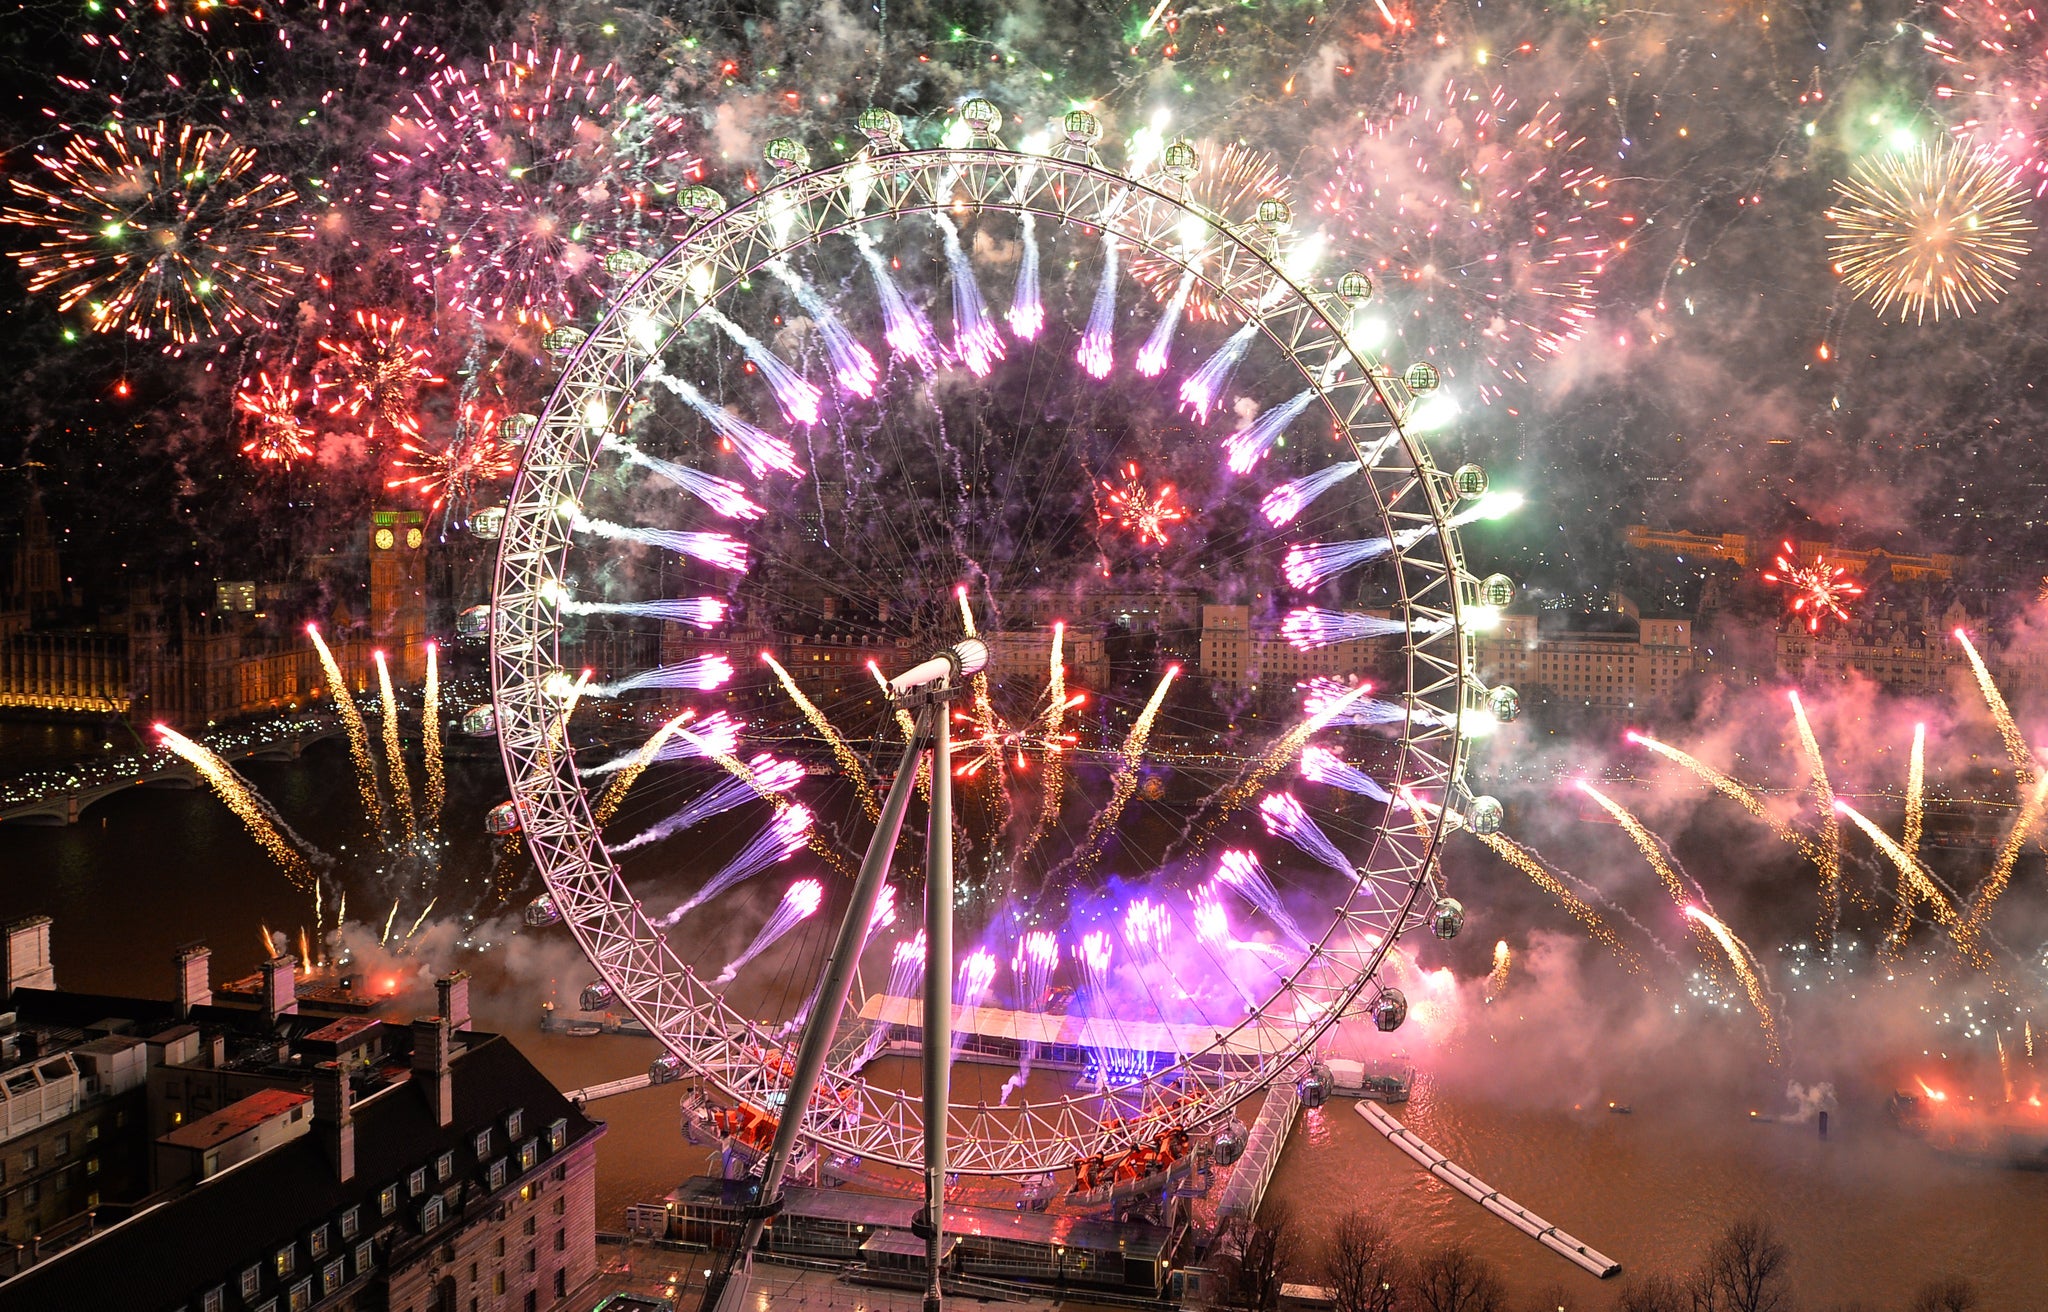 London's New Year's Eve fireworks event is going to be ticketed this year for the first time at £10 a head